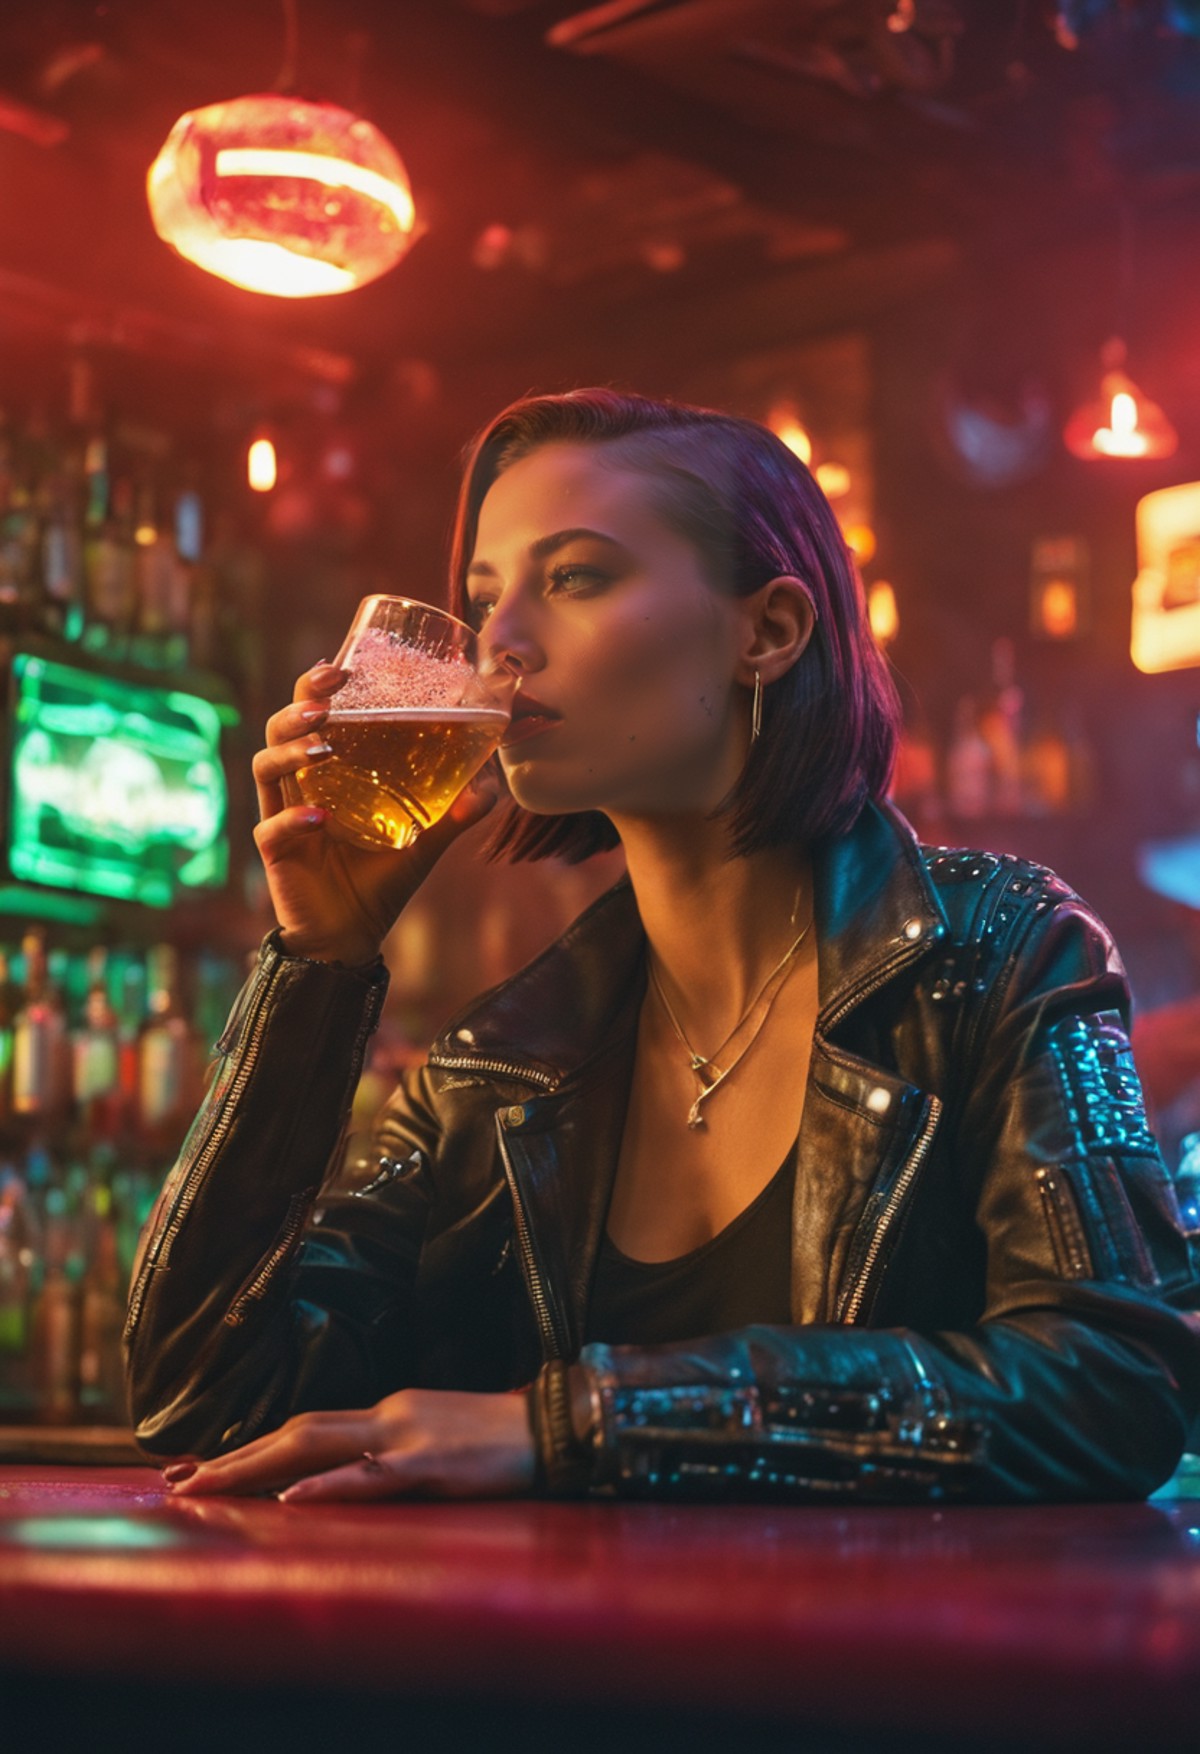 Photorealism redshift style analog style photograph close up; girl cyberpunk in a seedy bar drinking. Science fiction sett...